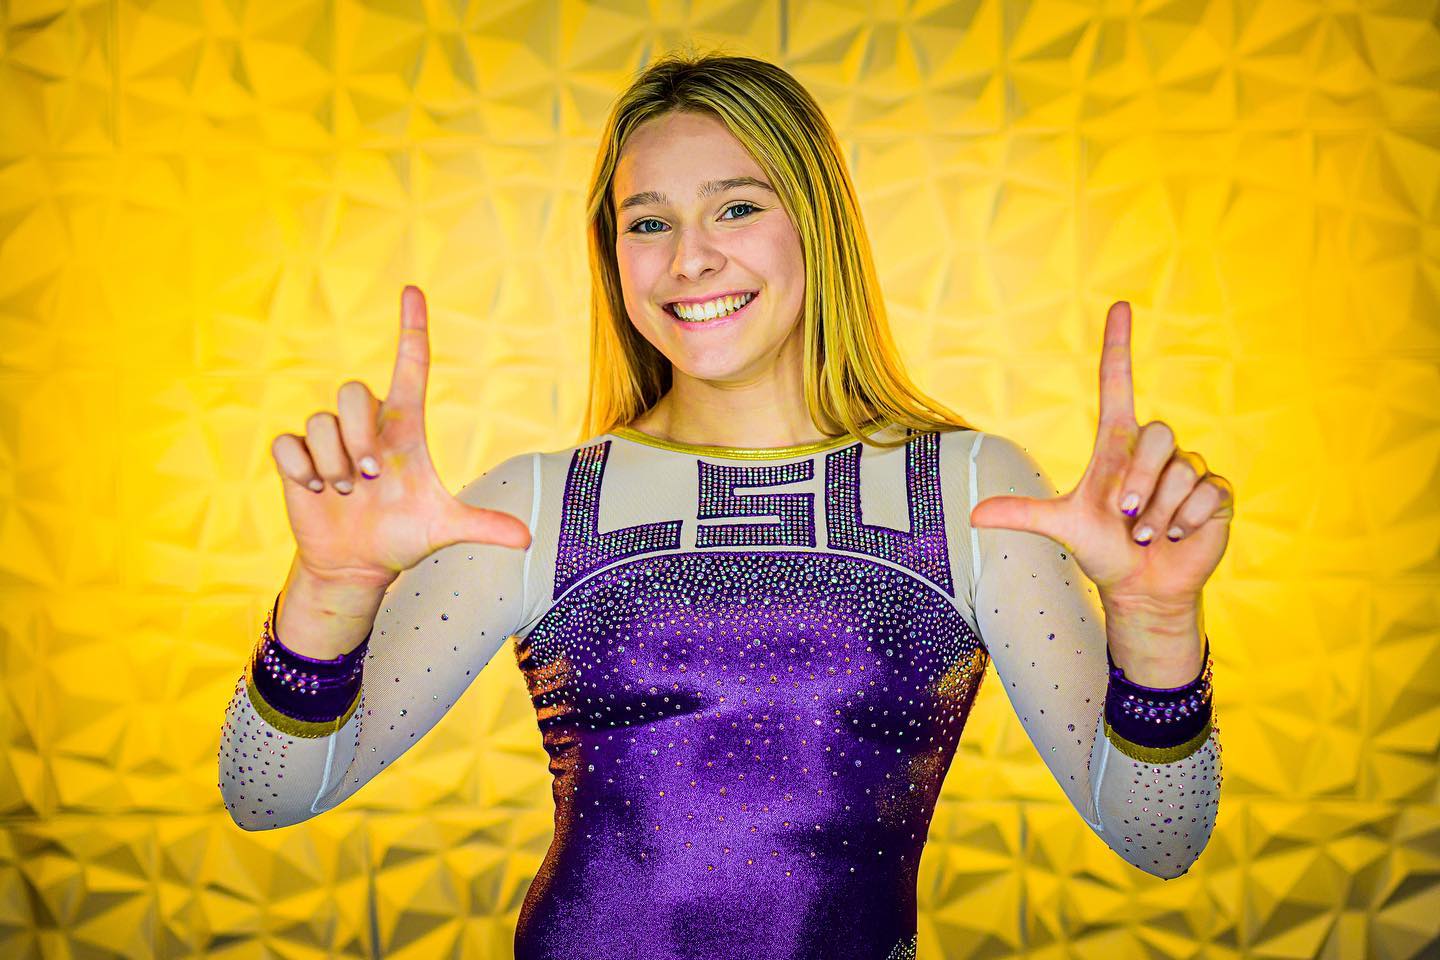 LSU gymnastics commit Lexi Zeiss posing with both hands in the shape of a capital letter “L”